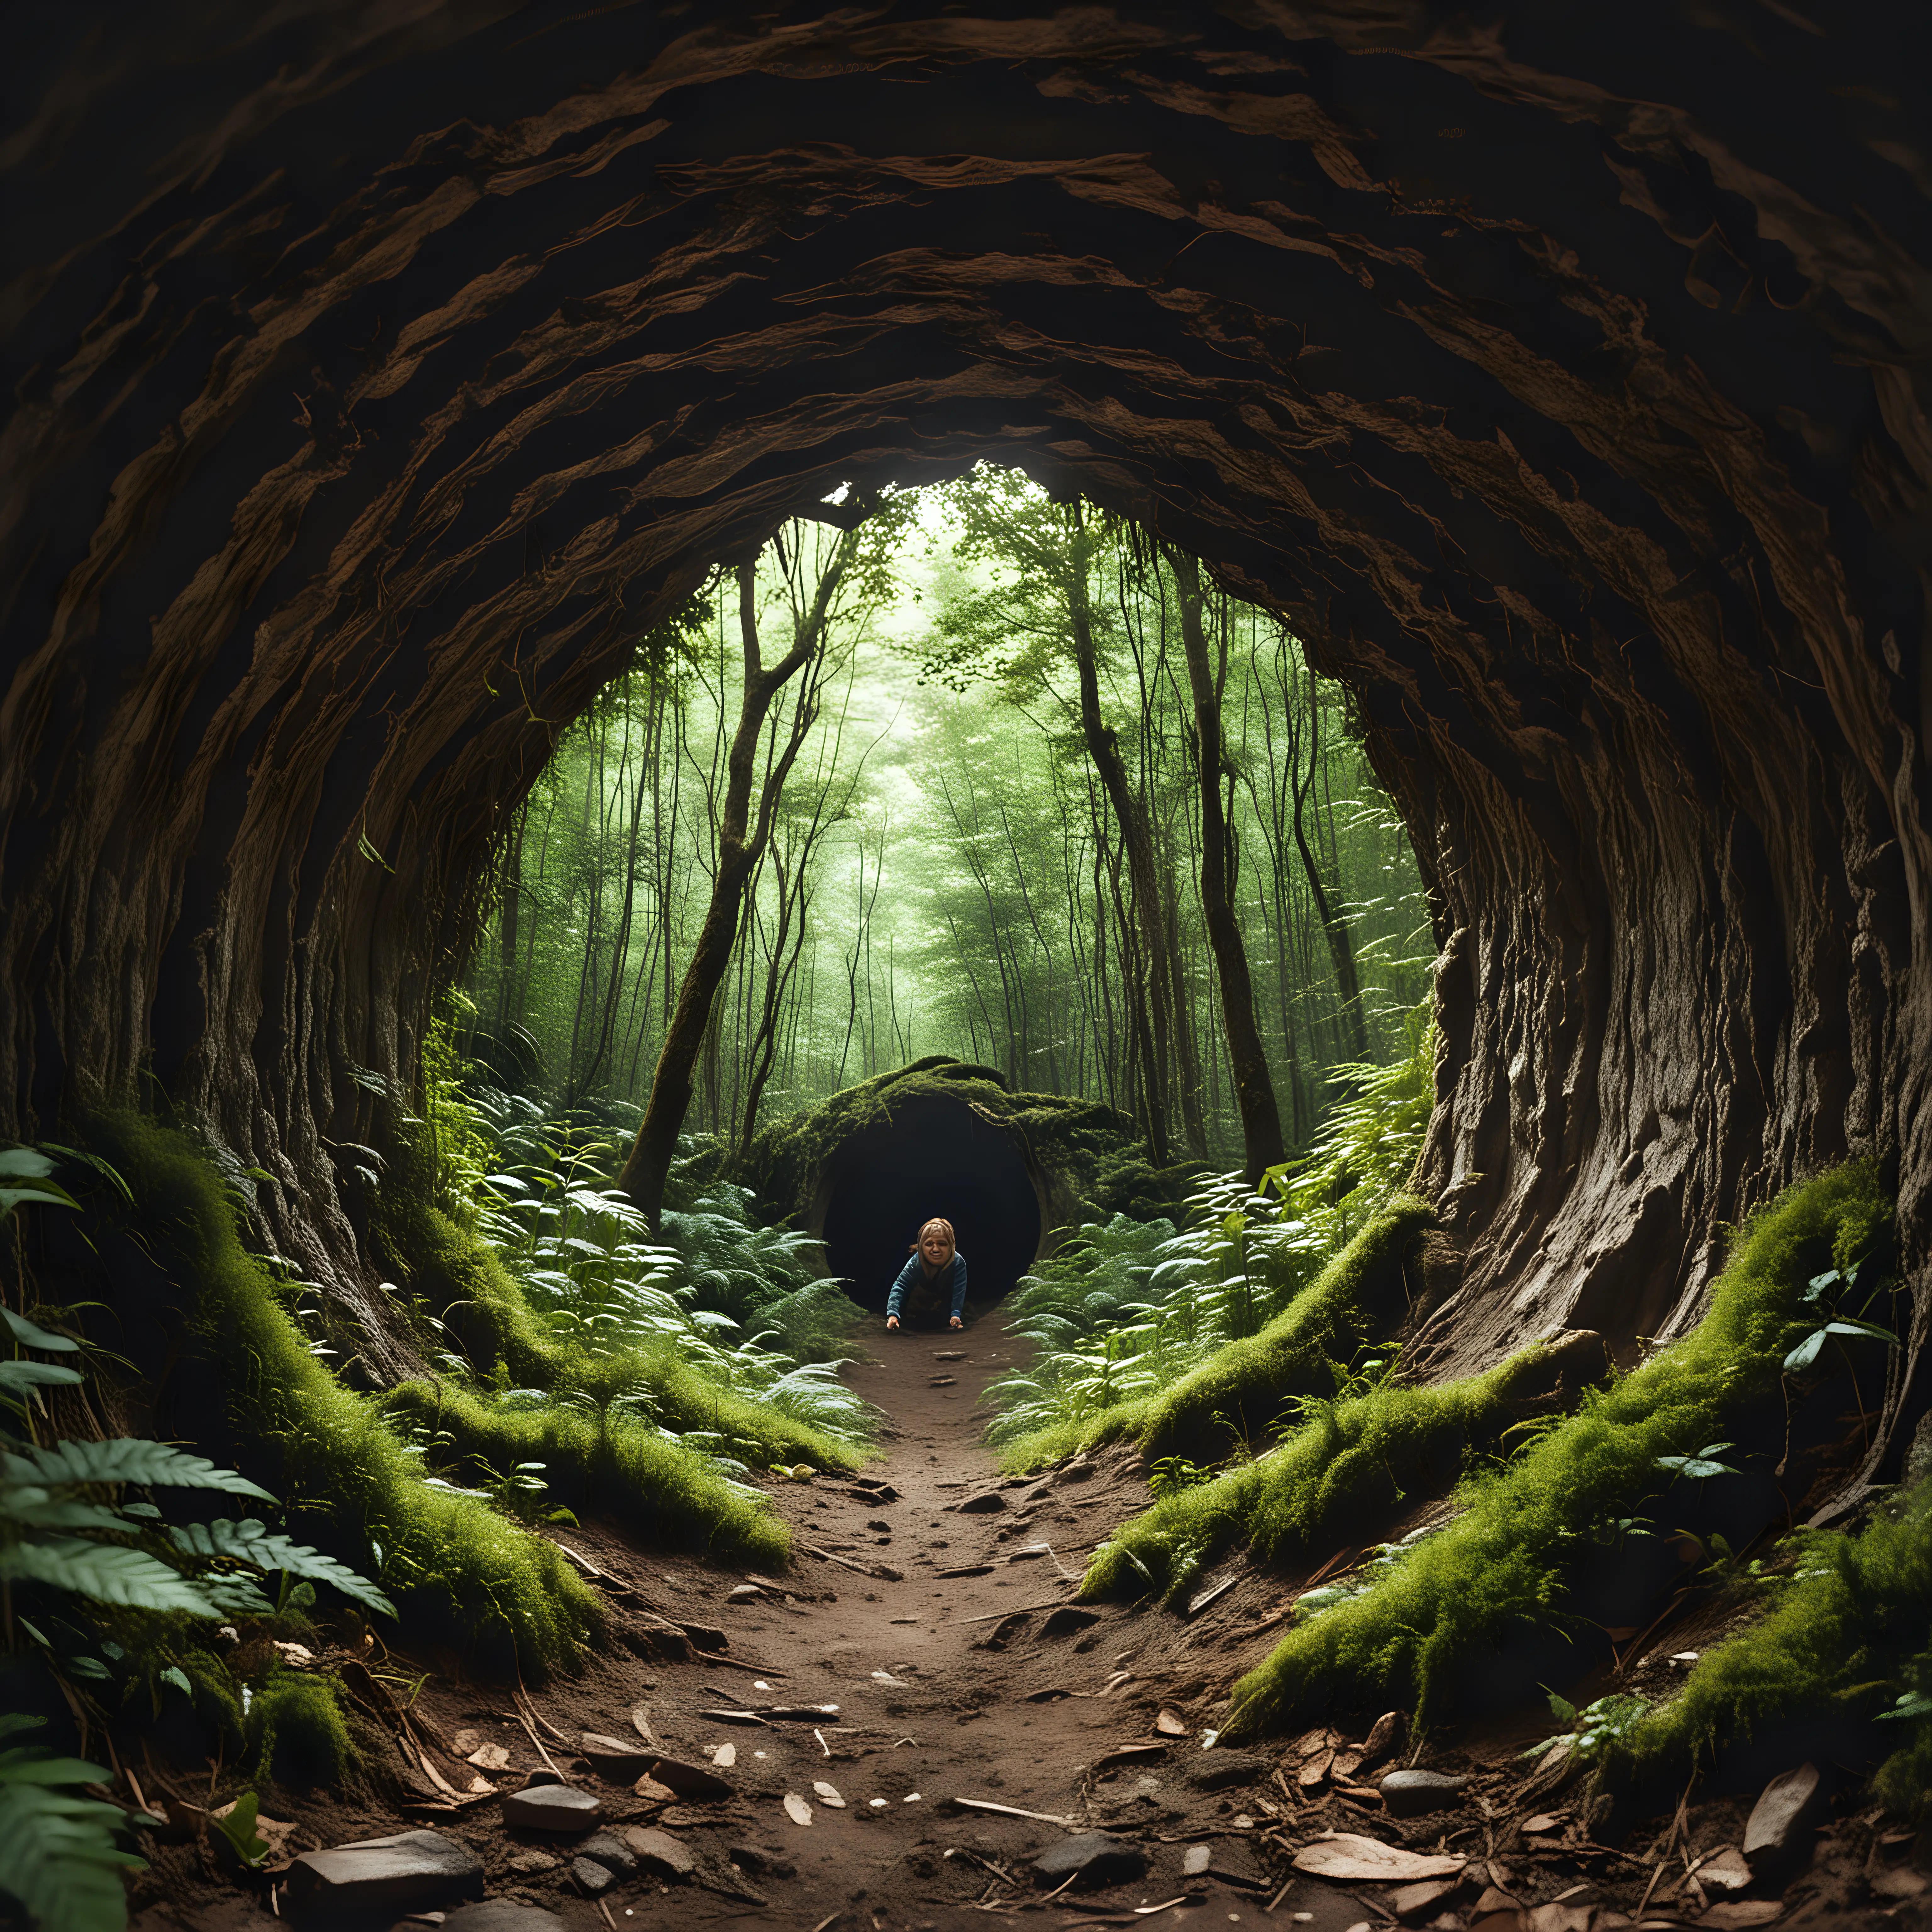 The view seen by a child who has crawled into a hollow space and is peering through a hole, seeing a fantasy forest